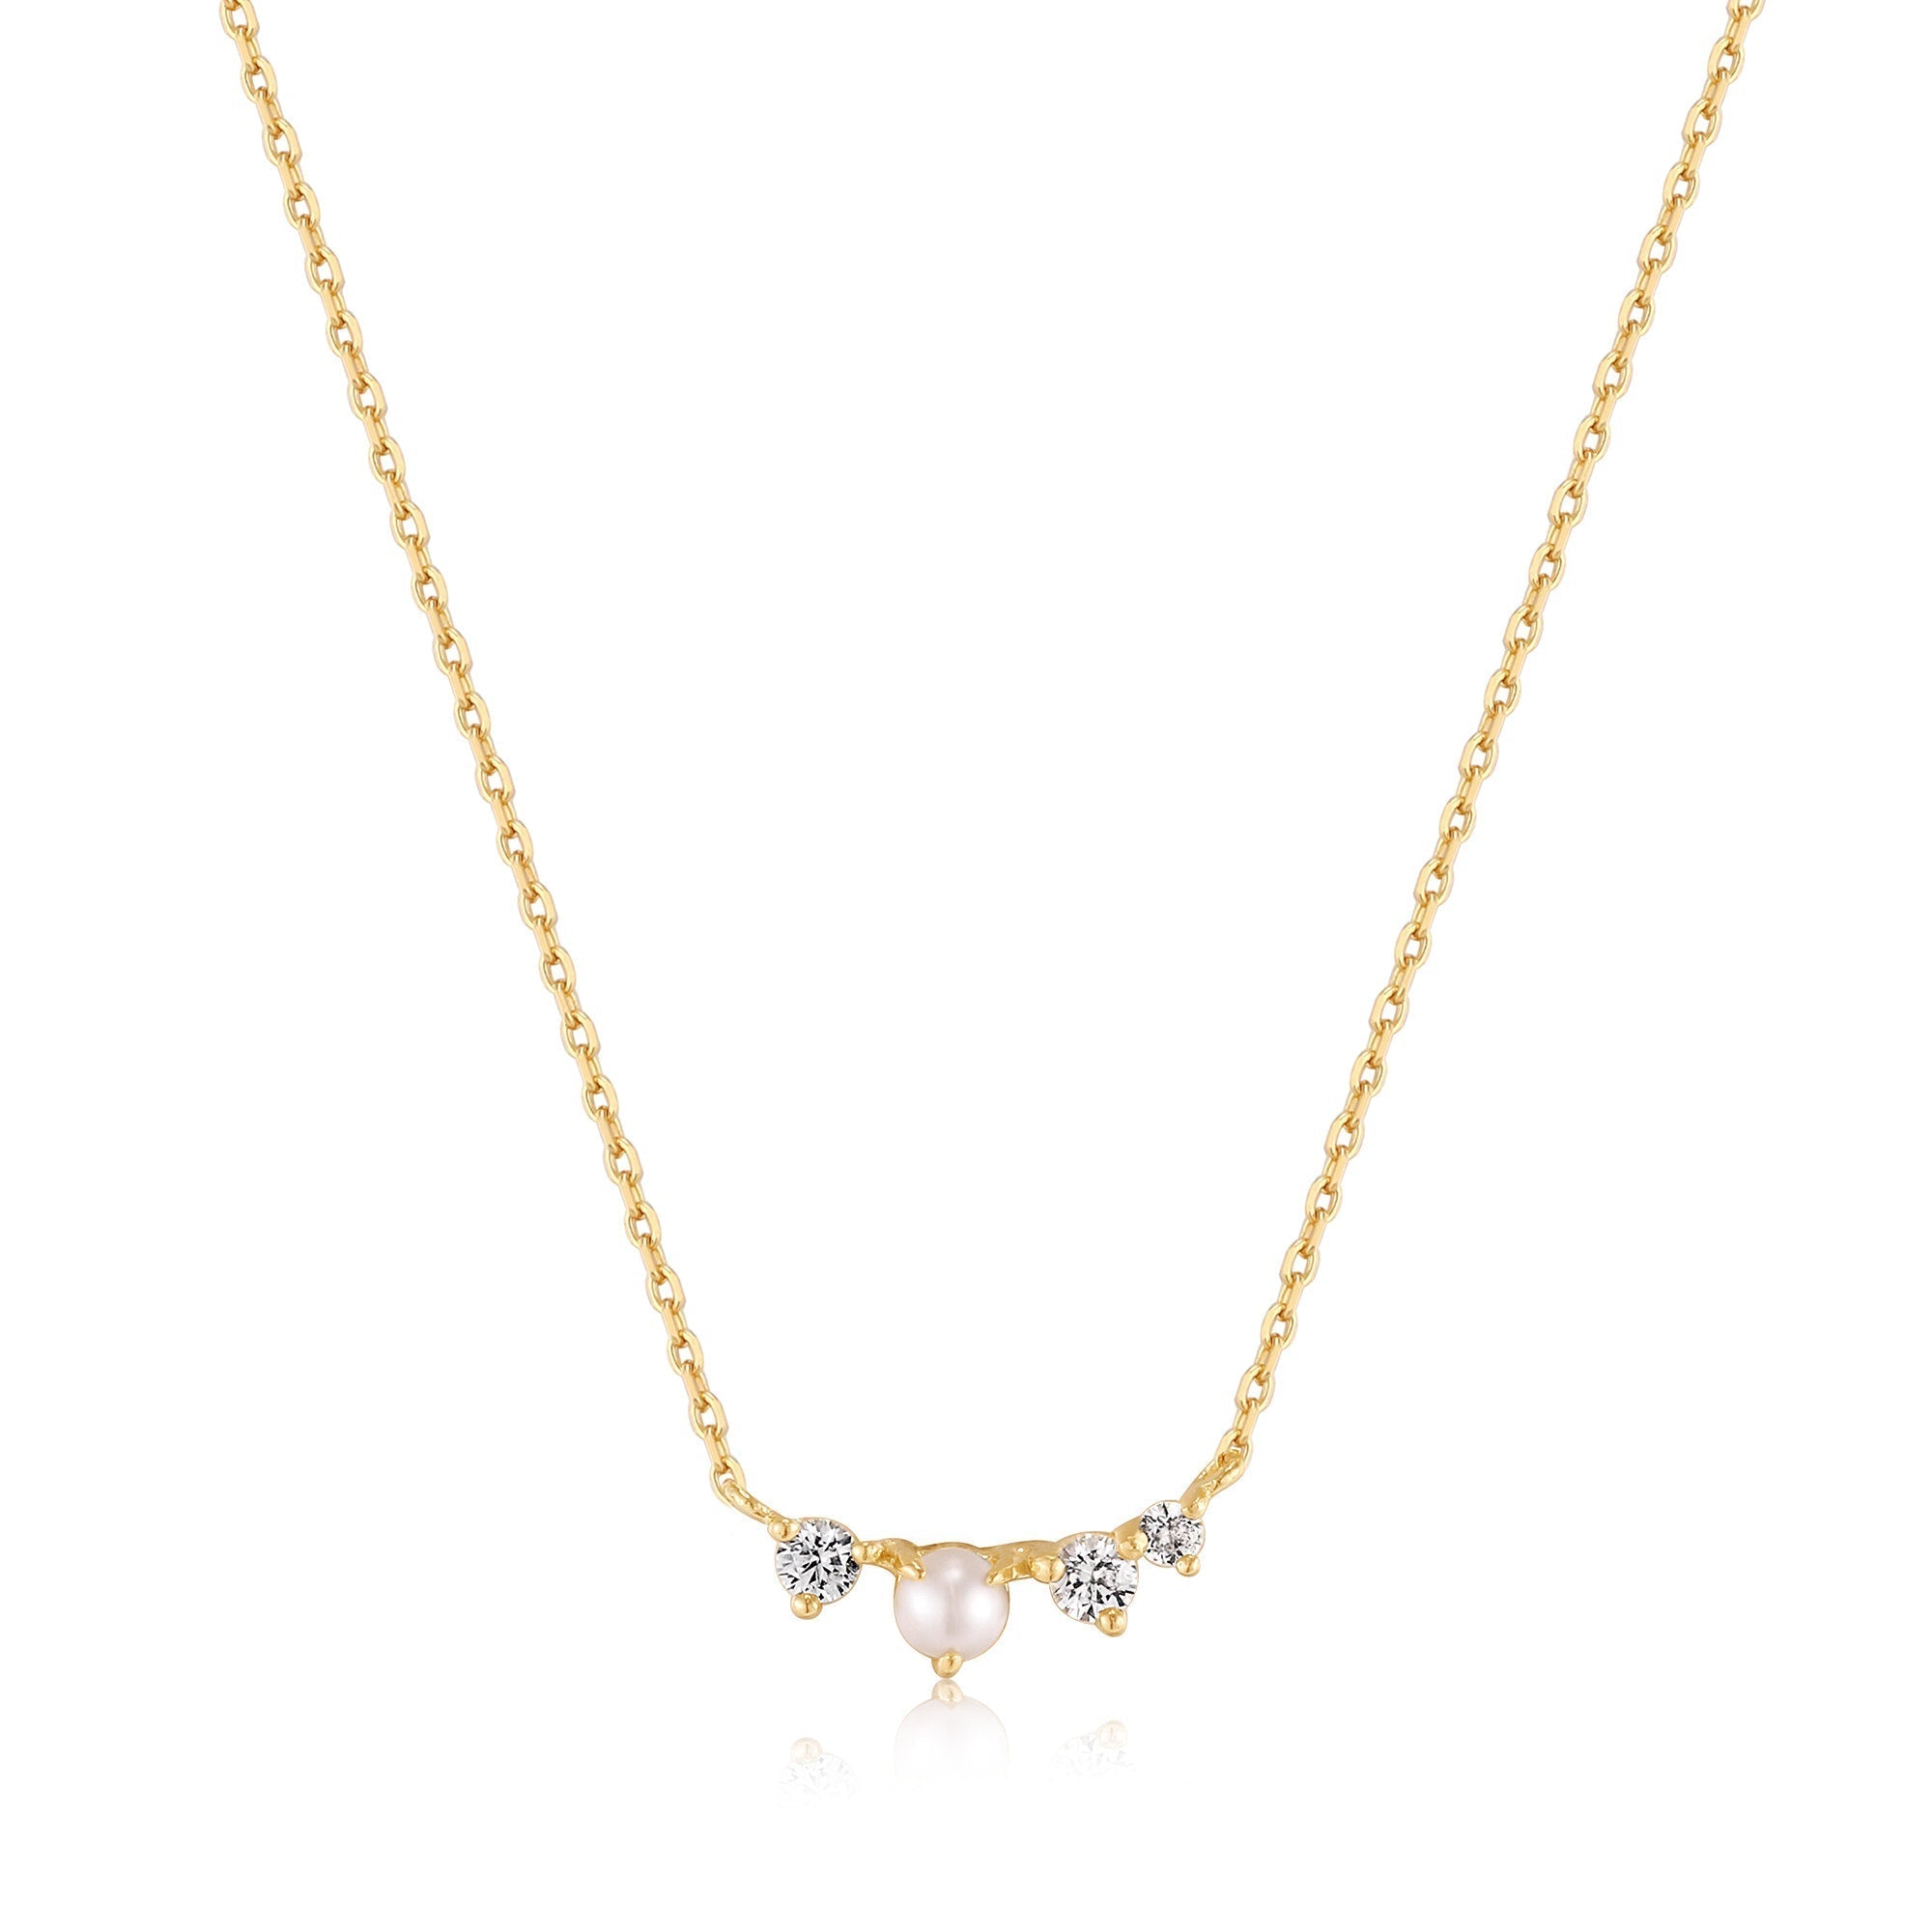 Ania Haie 14kt Gold Pearl and White Sapphire Radiance Necklace Necklaces Ania Haie 